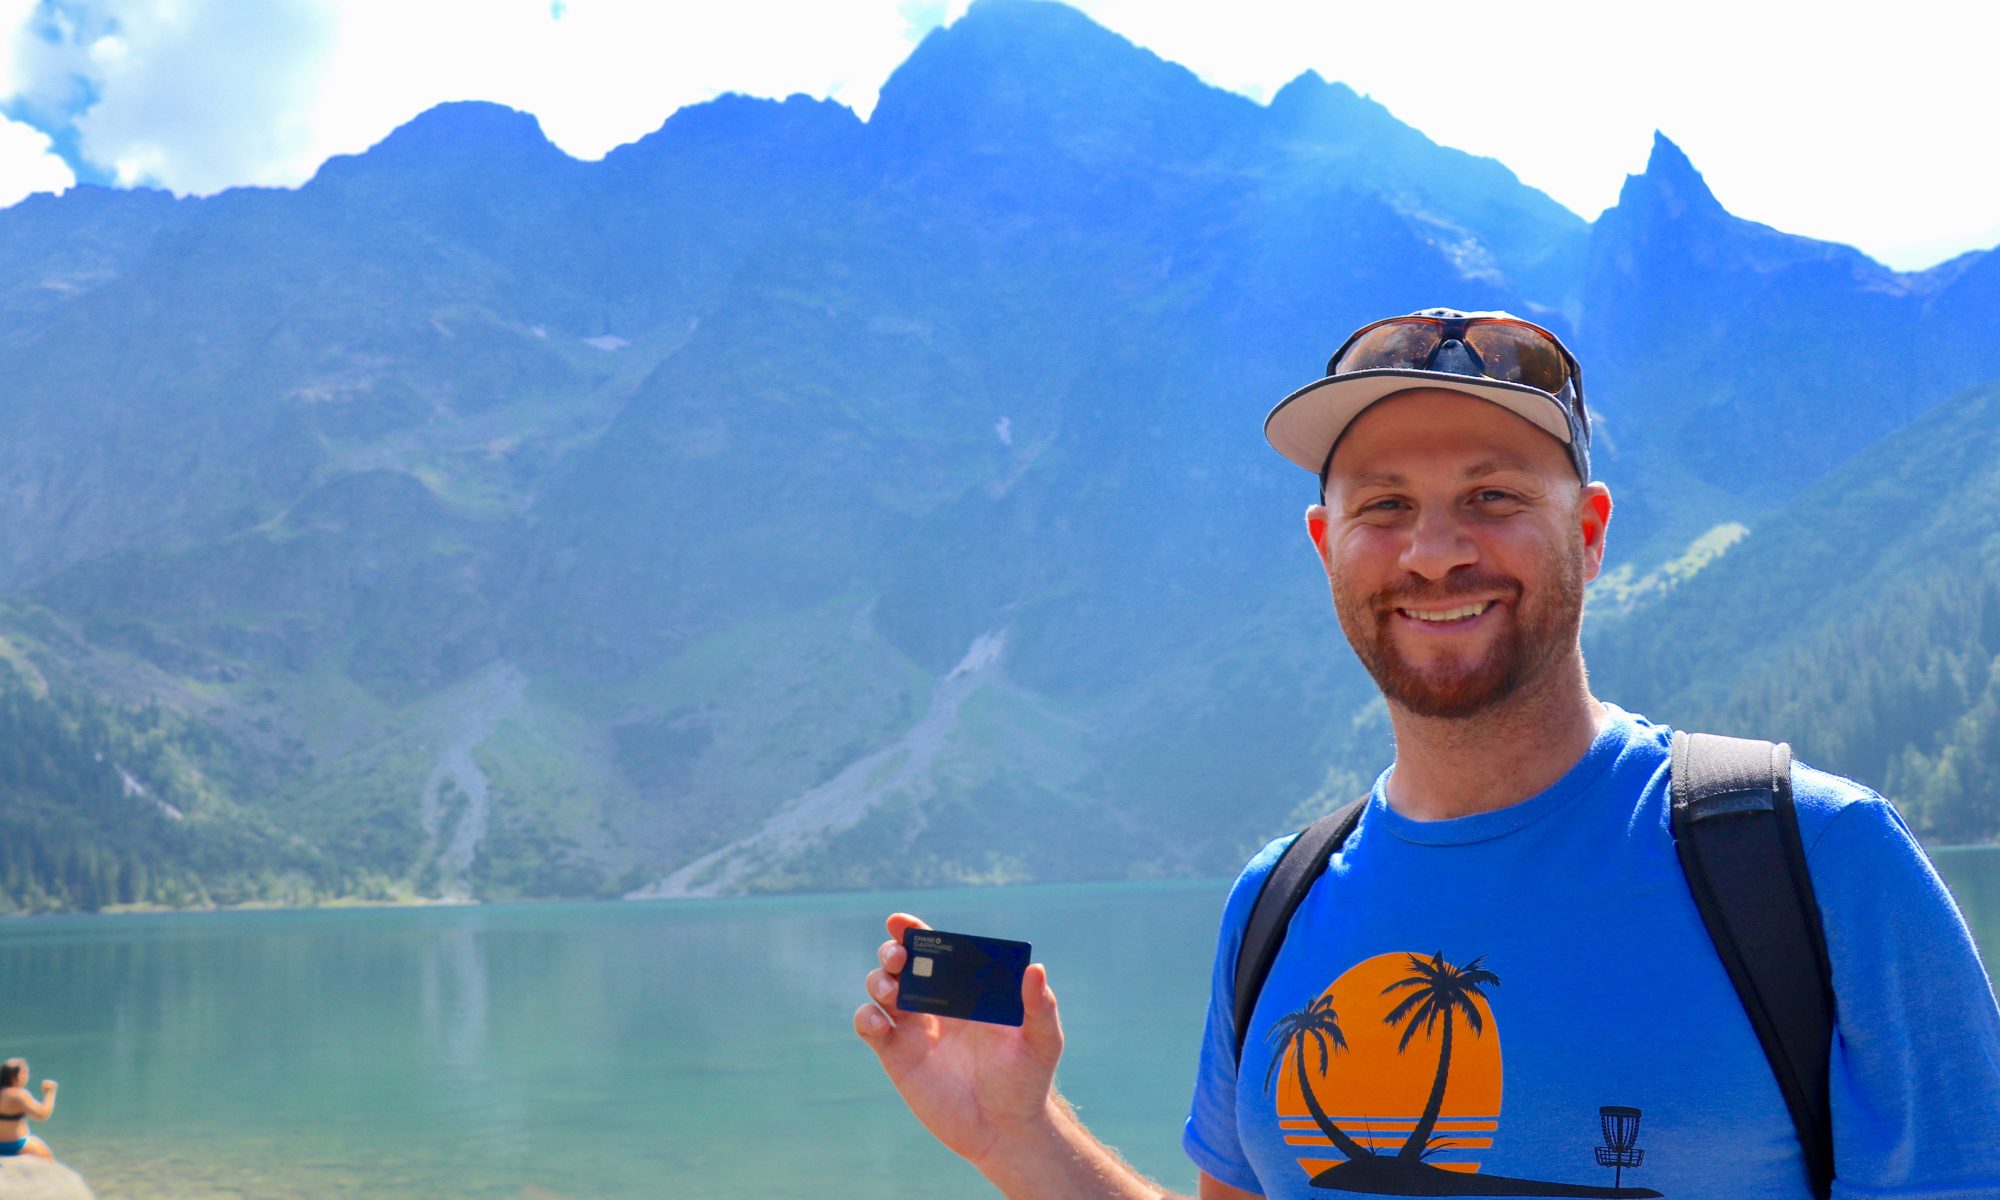 Scott using his Chase Sapphire Preferred credit card points to hike the beautiful mountains and lakes of Poland